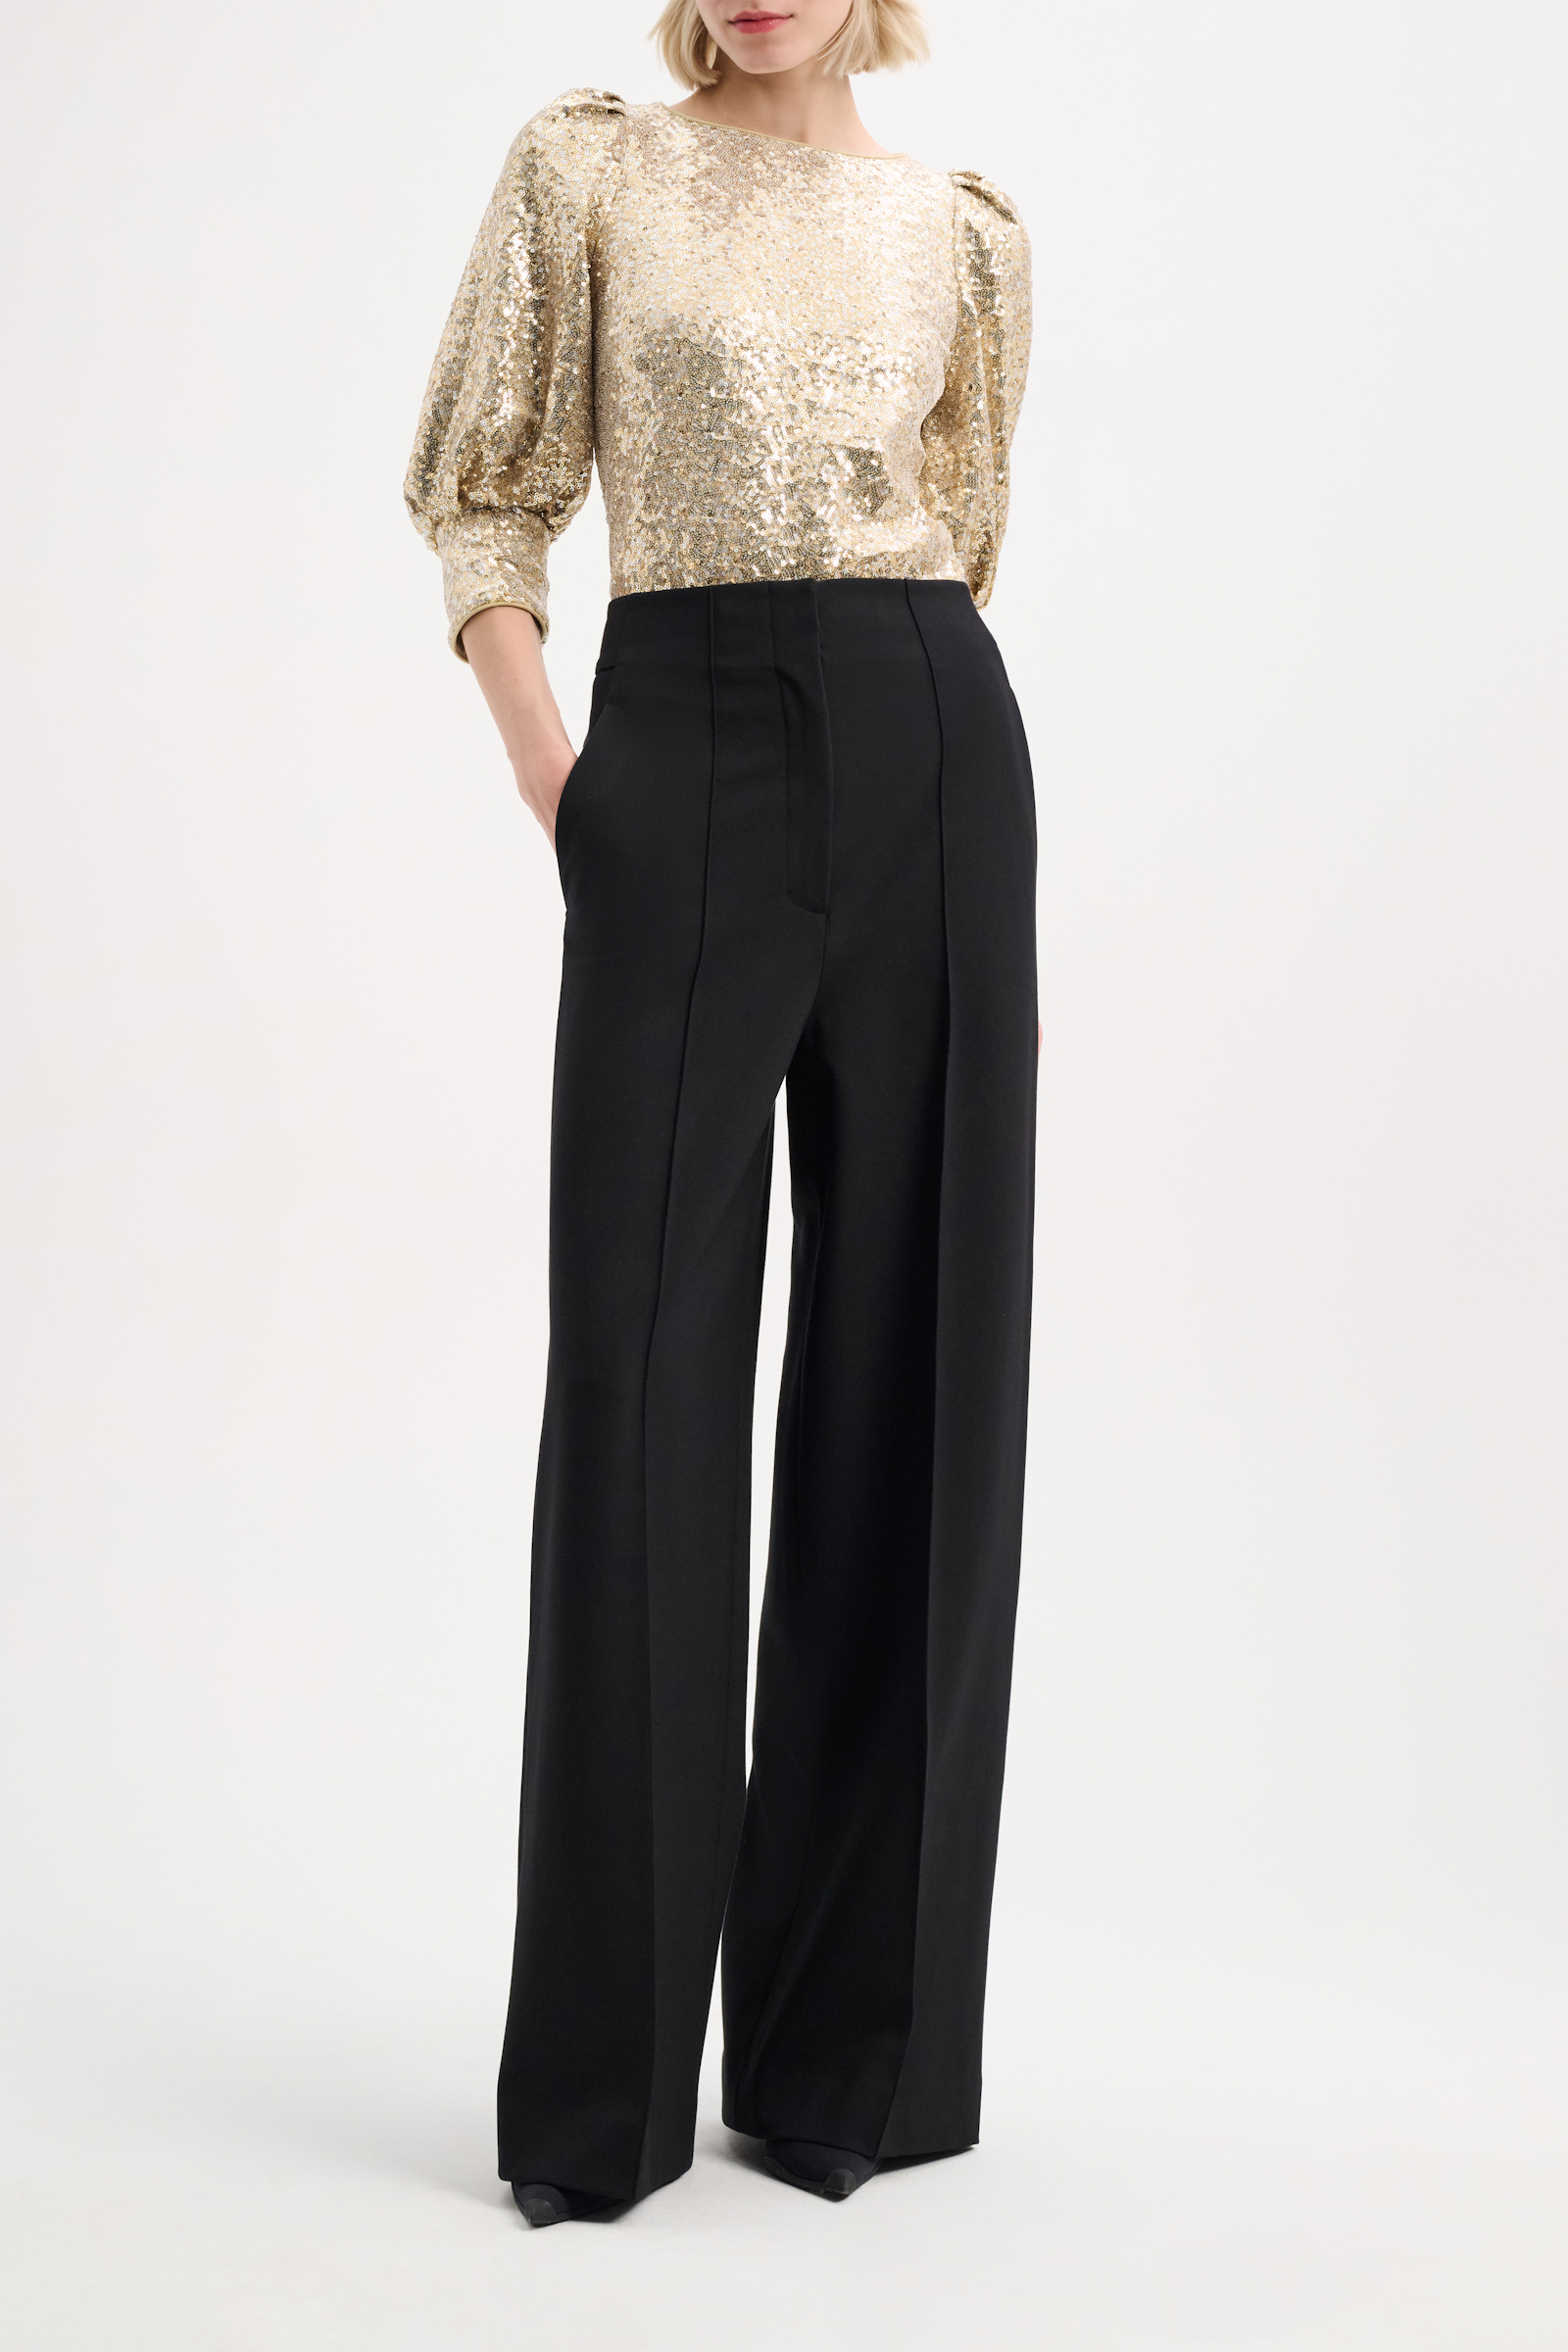 Dorothee Schumacher Sequin top with voluminous sleeves colorful sparkle